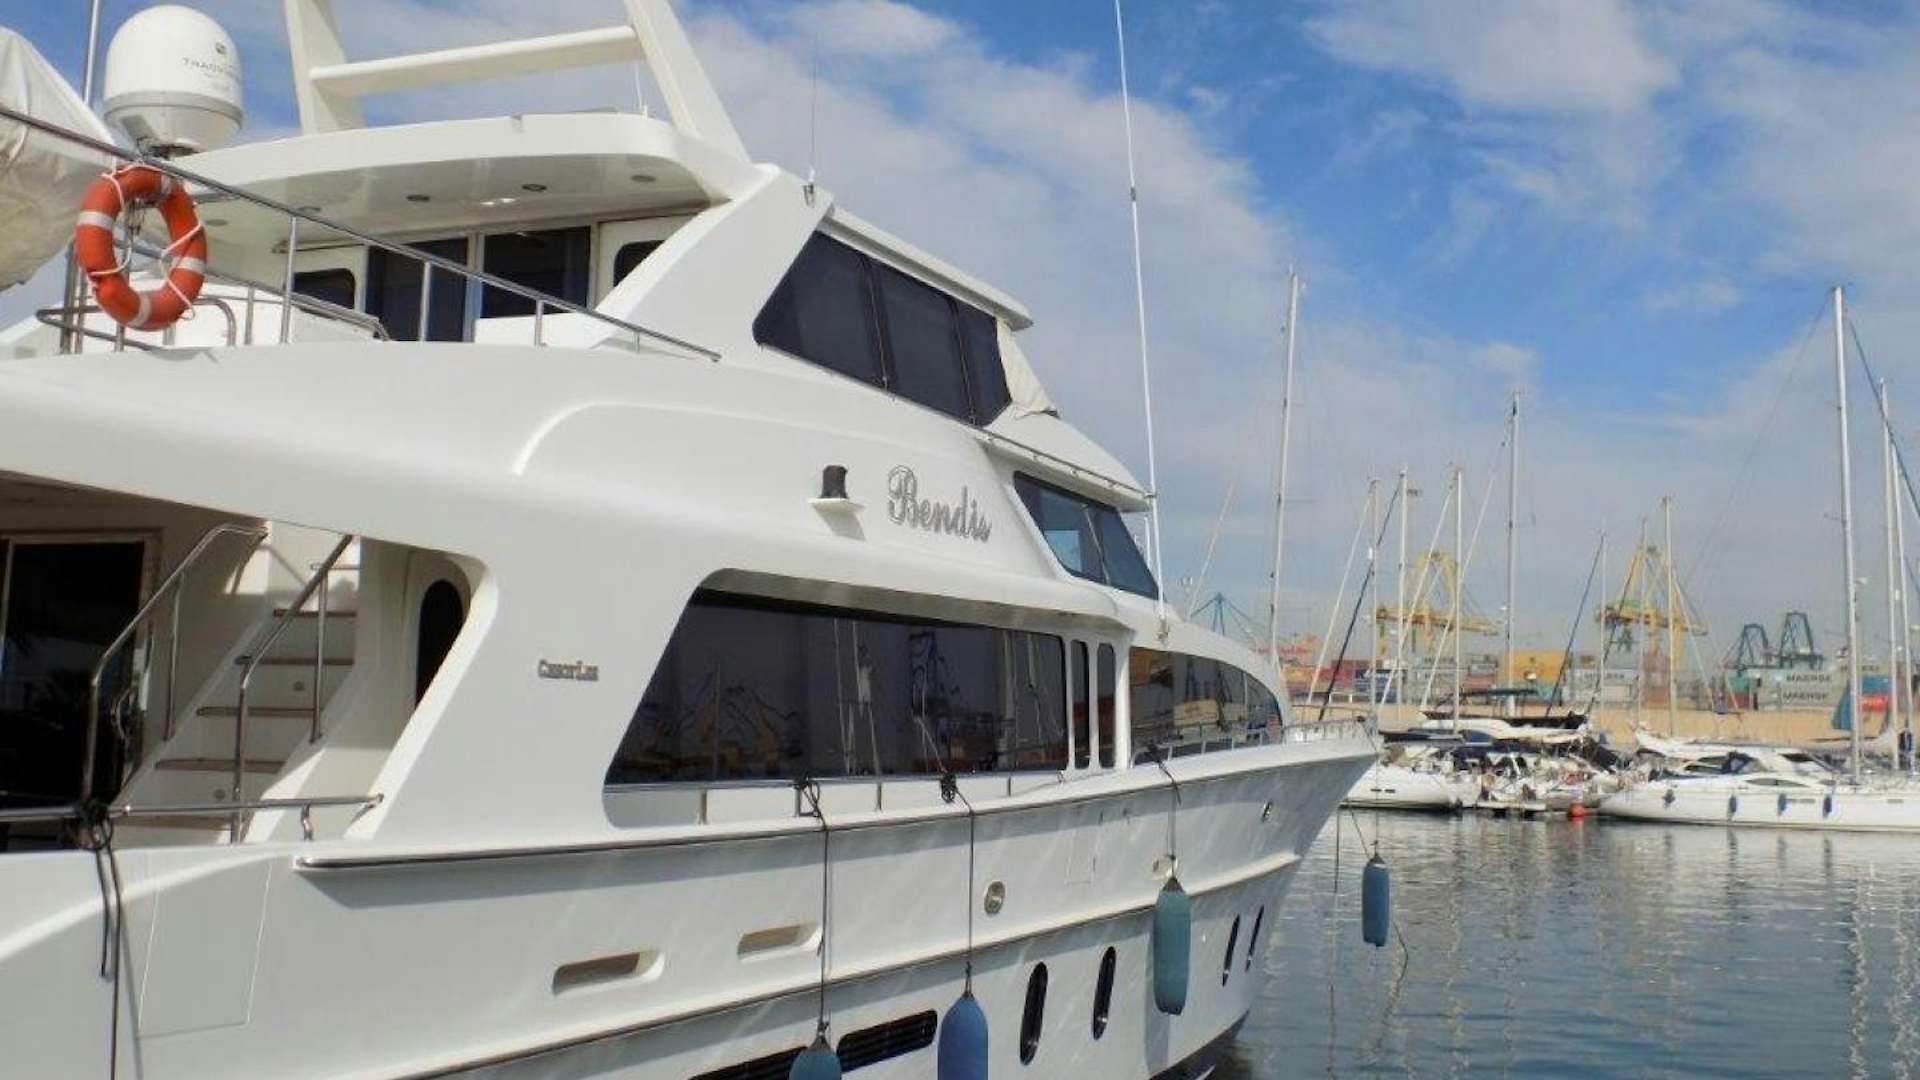 Bendis
Yacht for Sale